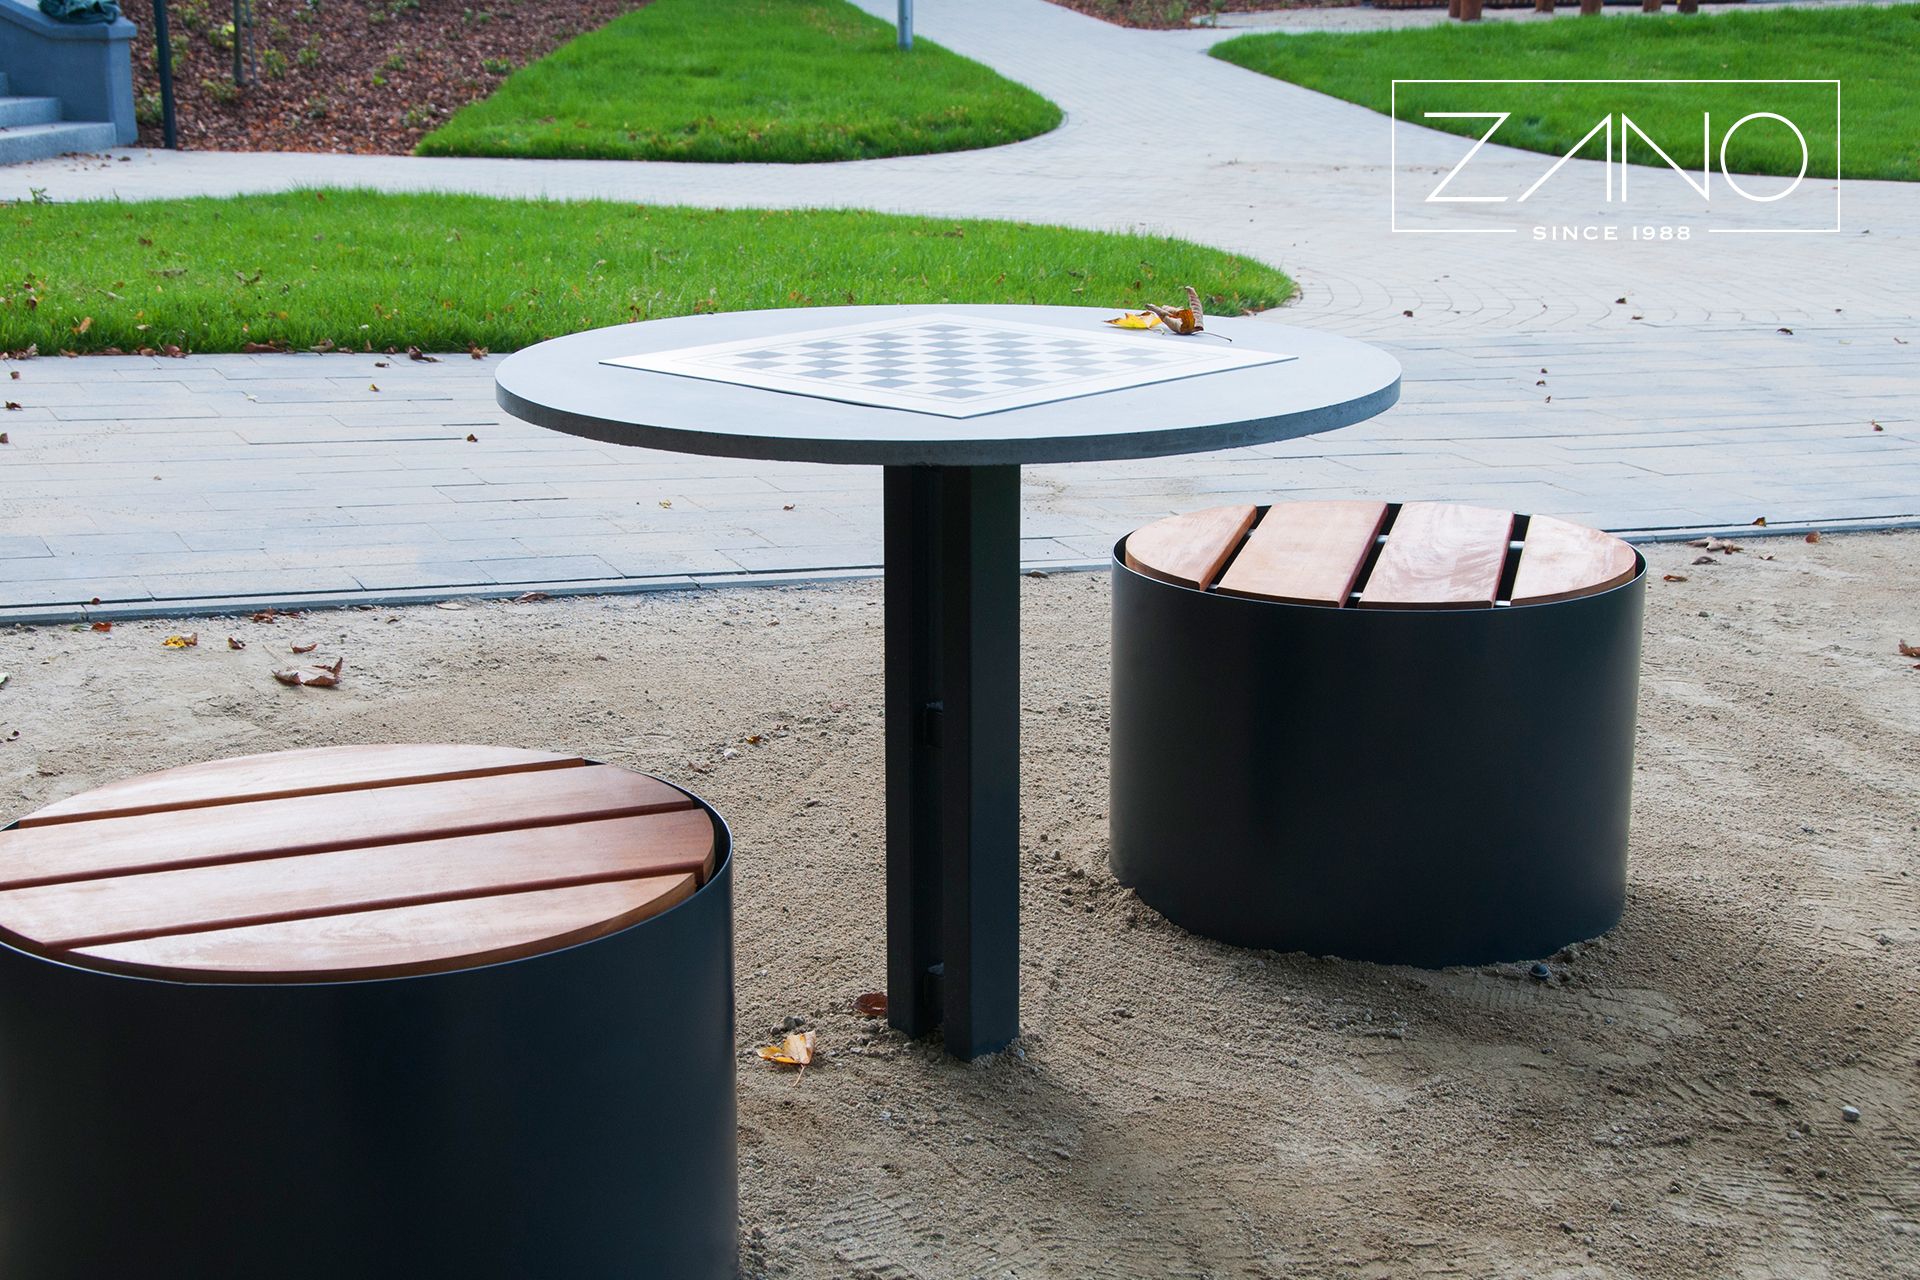 Outdoor chess table | ZANO Street Furniture